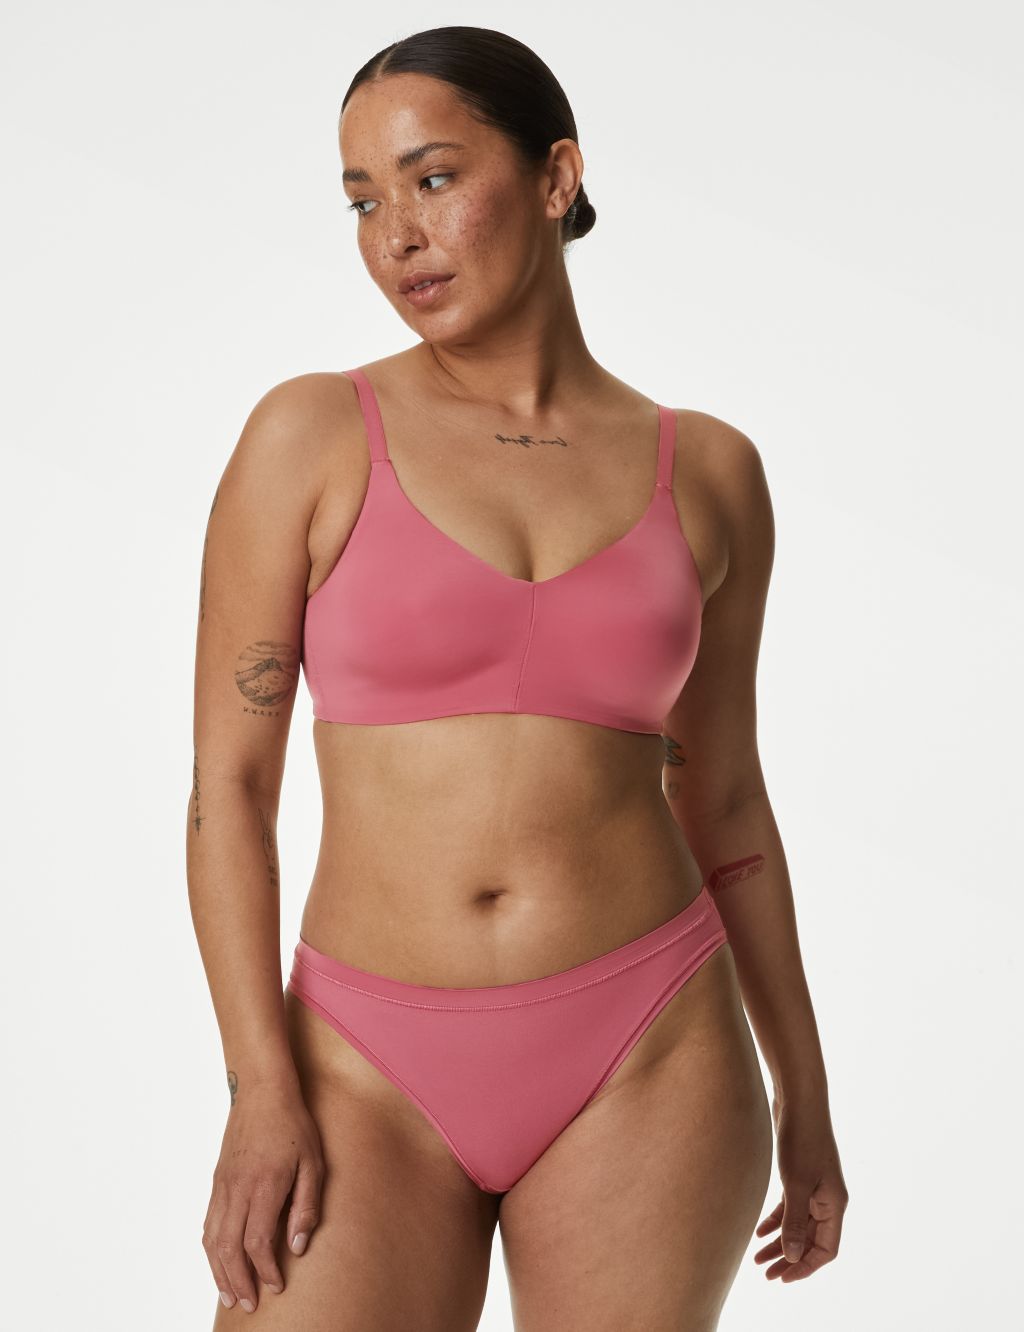 Flexifit™ Non Wired Full Cup Bra set  A-E image 1